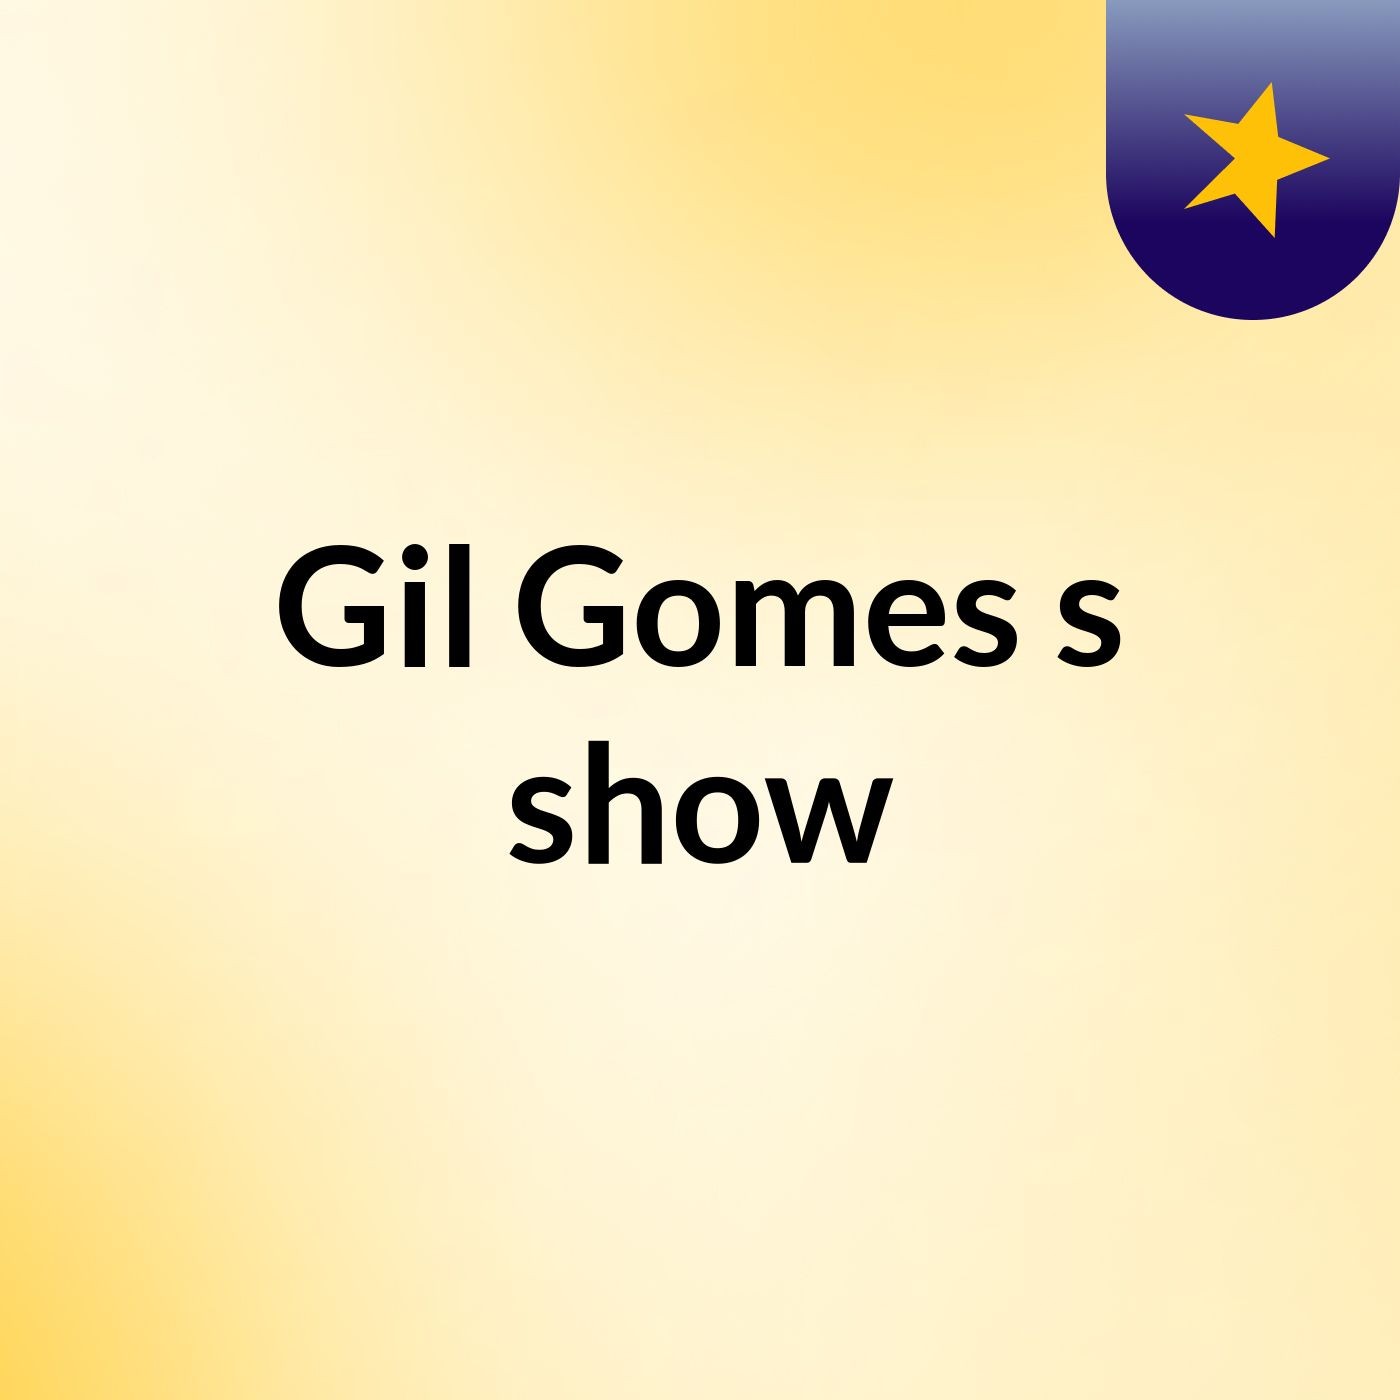 Gil Gomes's show